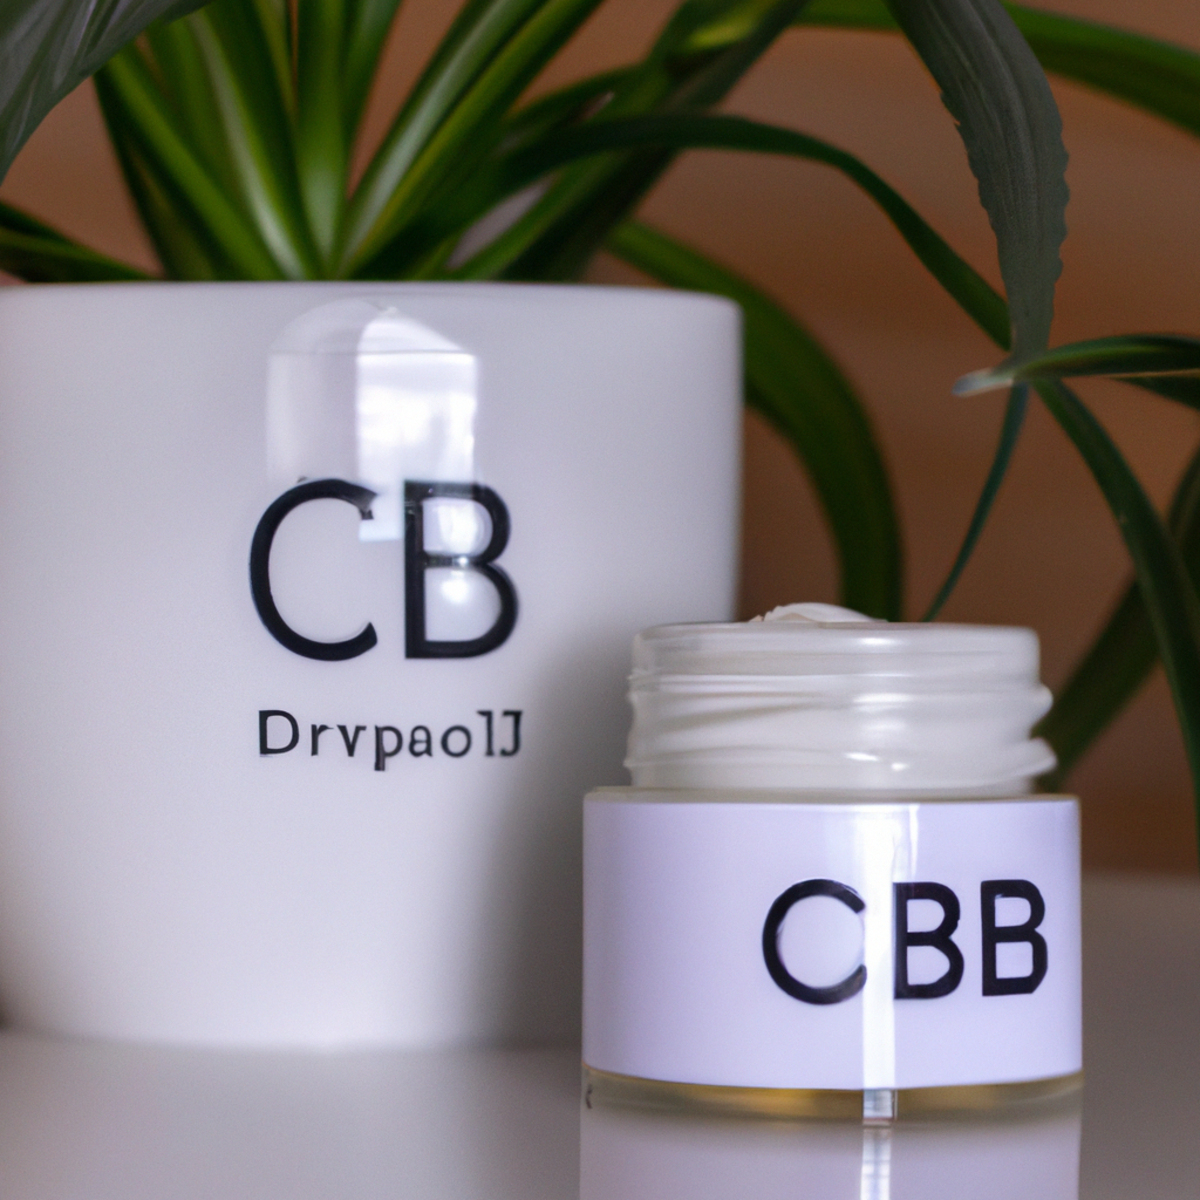 Get ready to glow with our all-natural skin care routines! Our CBD-infused cream is the perfect addition to your daily regimen, leaving your skin feeling refreshed and rejuvenated. With ingredients straight from Mother Nature herself, you'll be radiating beauty in no time.